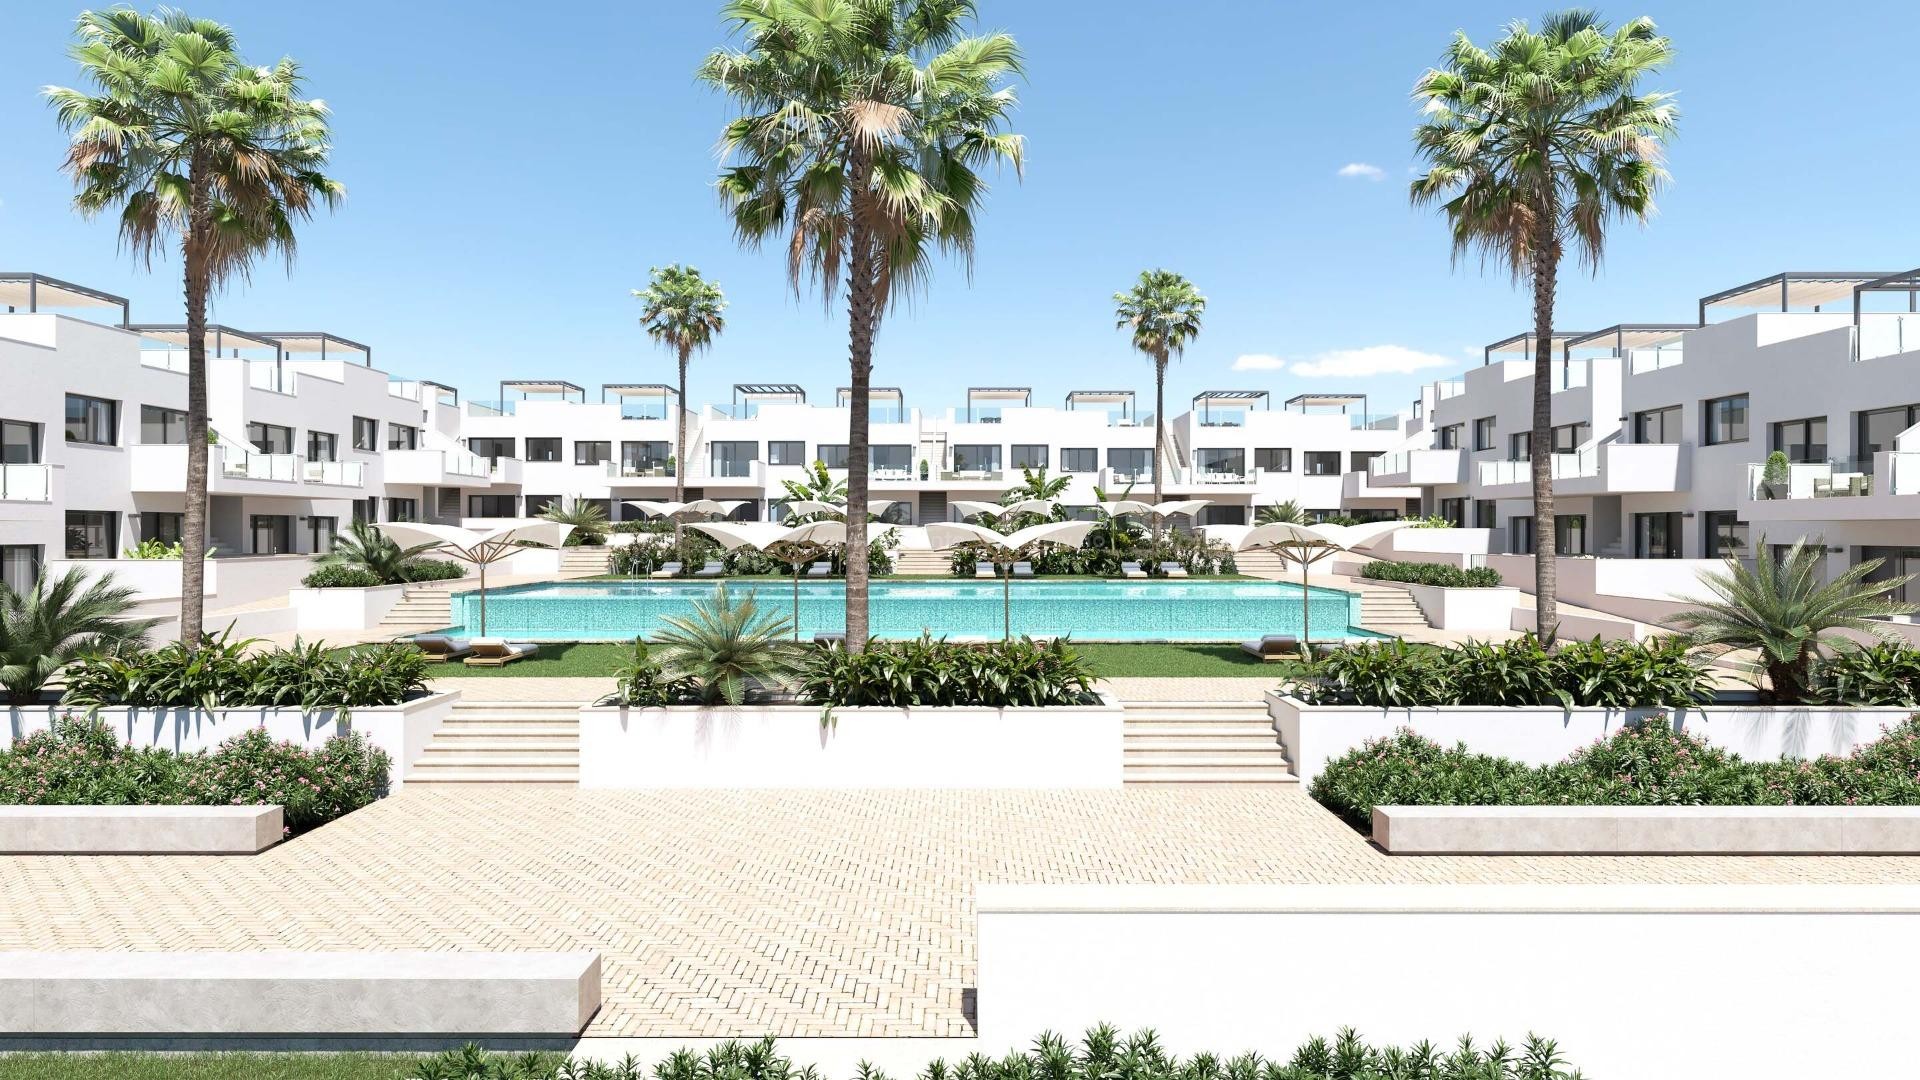 Bungalows and apartments in Los Balcones, Torrevieja, 2 bedrooms (possibility of 3), 2 bathrooms, garden or solarium/bakong, spectacular views of Torrevieja